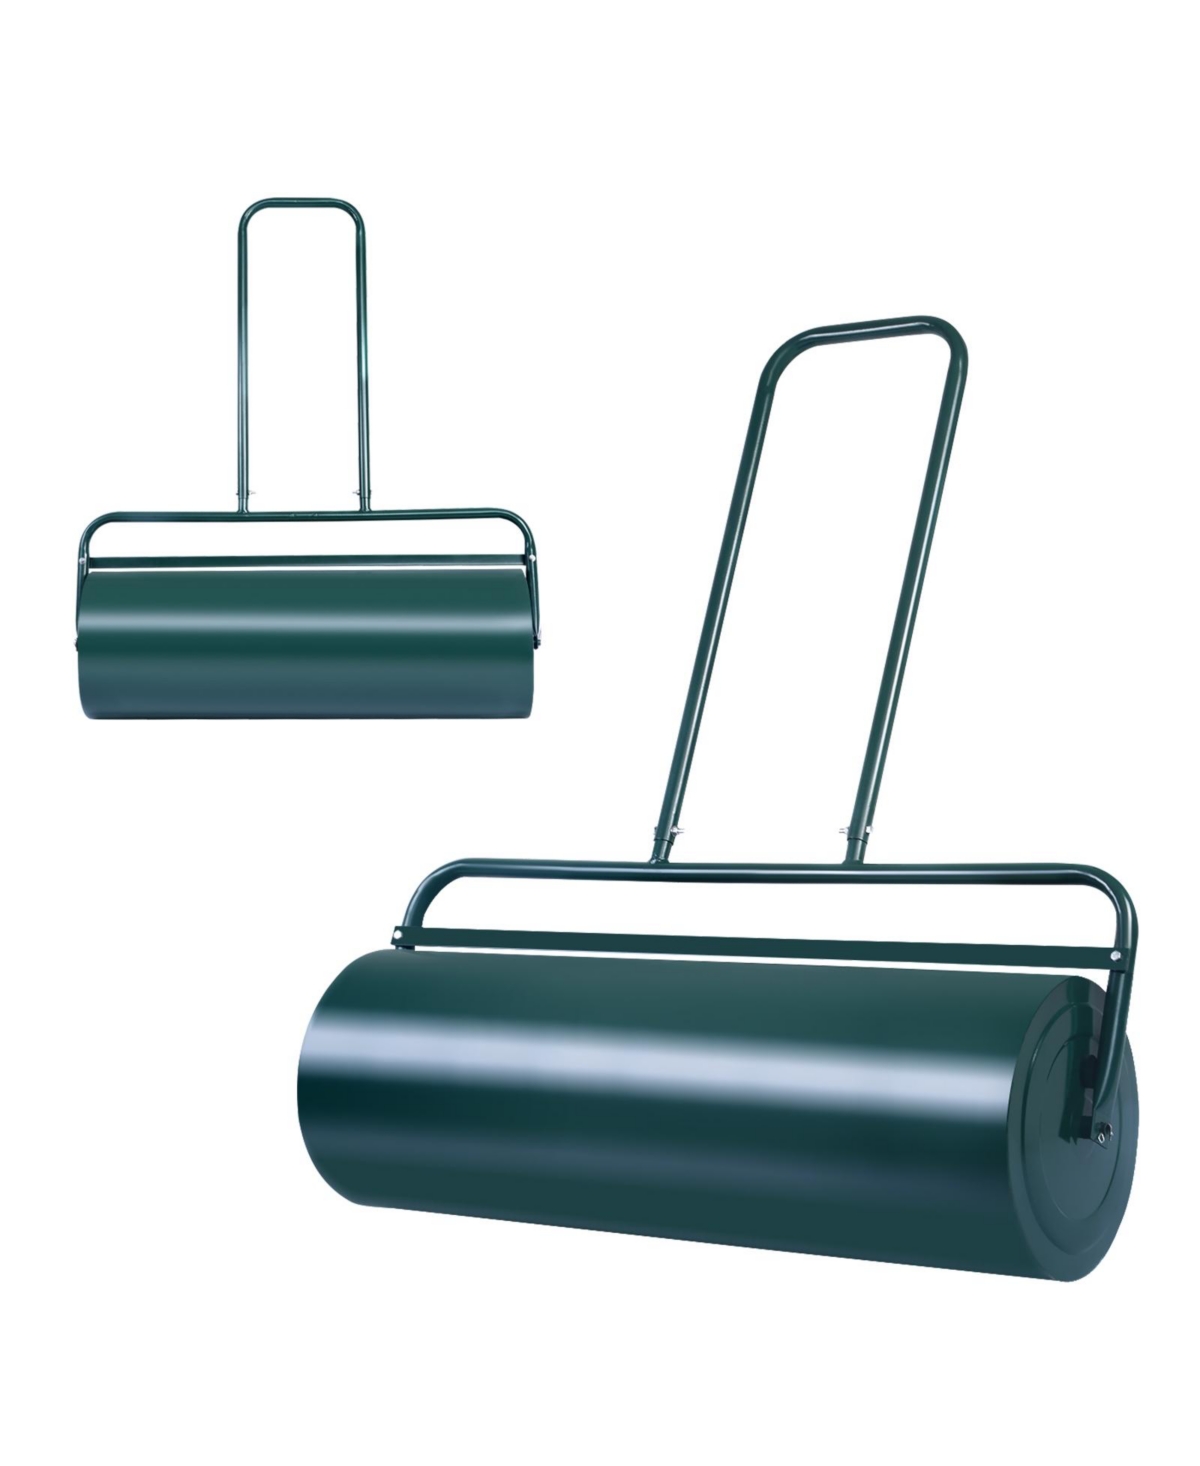 36 x 12 Inch Tow Lawn Roller Water Filled Metal Push Roller - Green